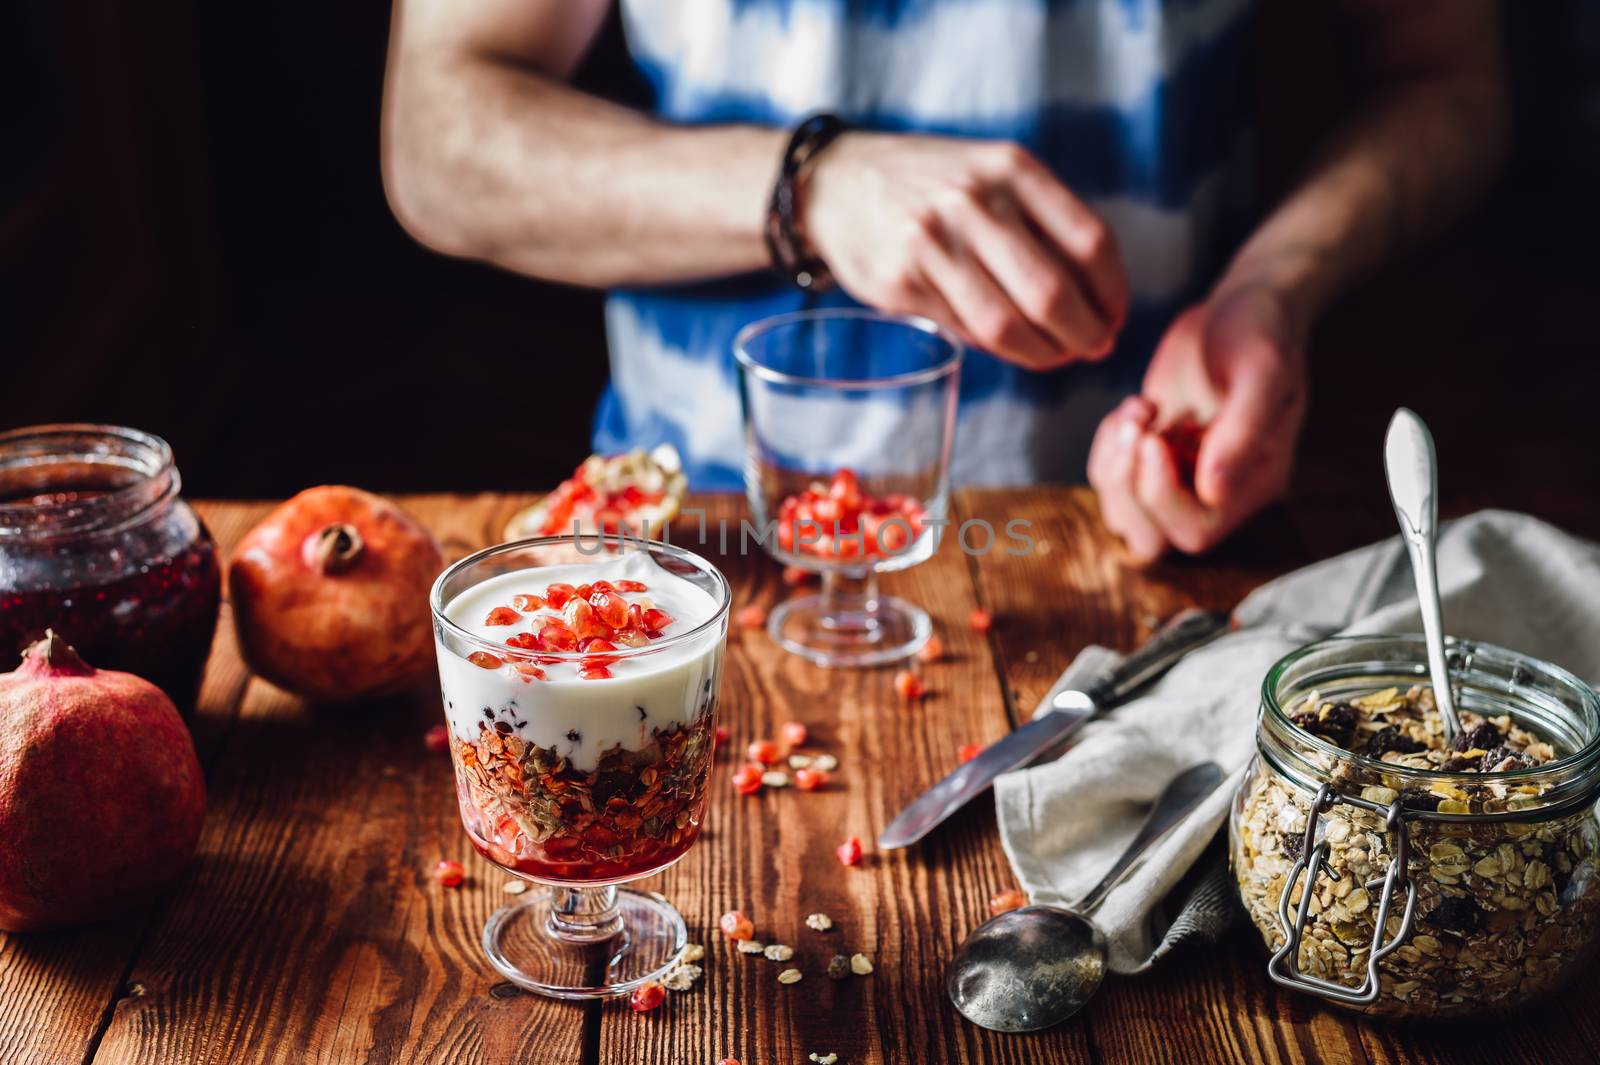 Dessert with Pomegranate and Man Prepare New Portion on Backdrop. Series on Prepare Healthy Dessert with Pomegranate, Granola, Cream and Jam